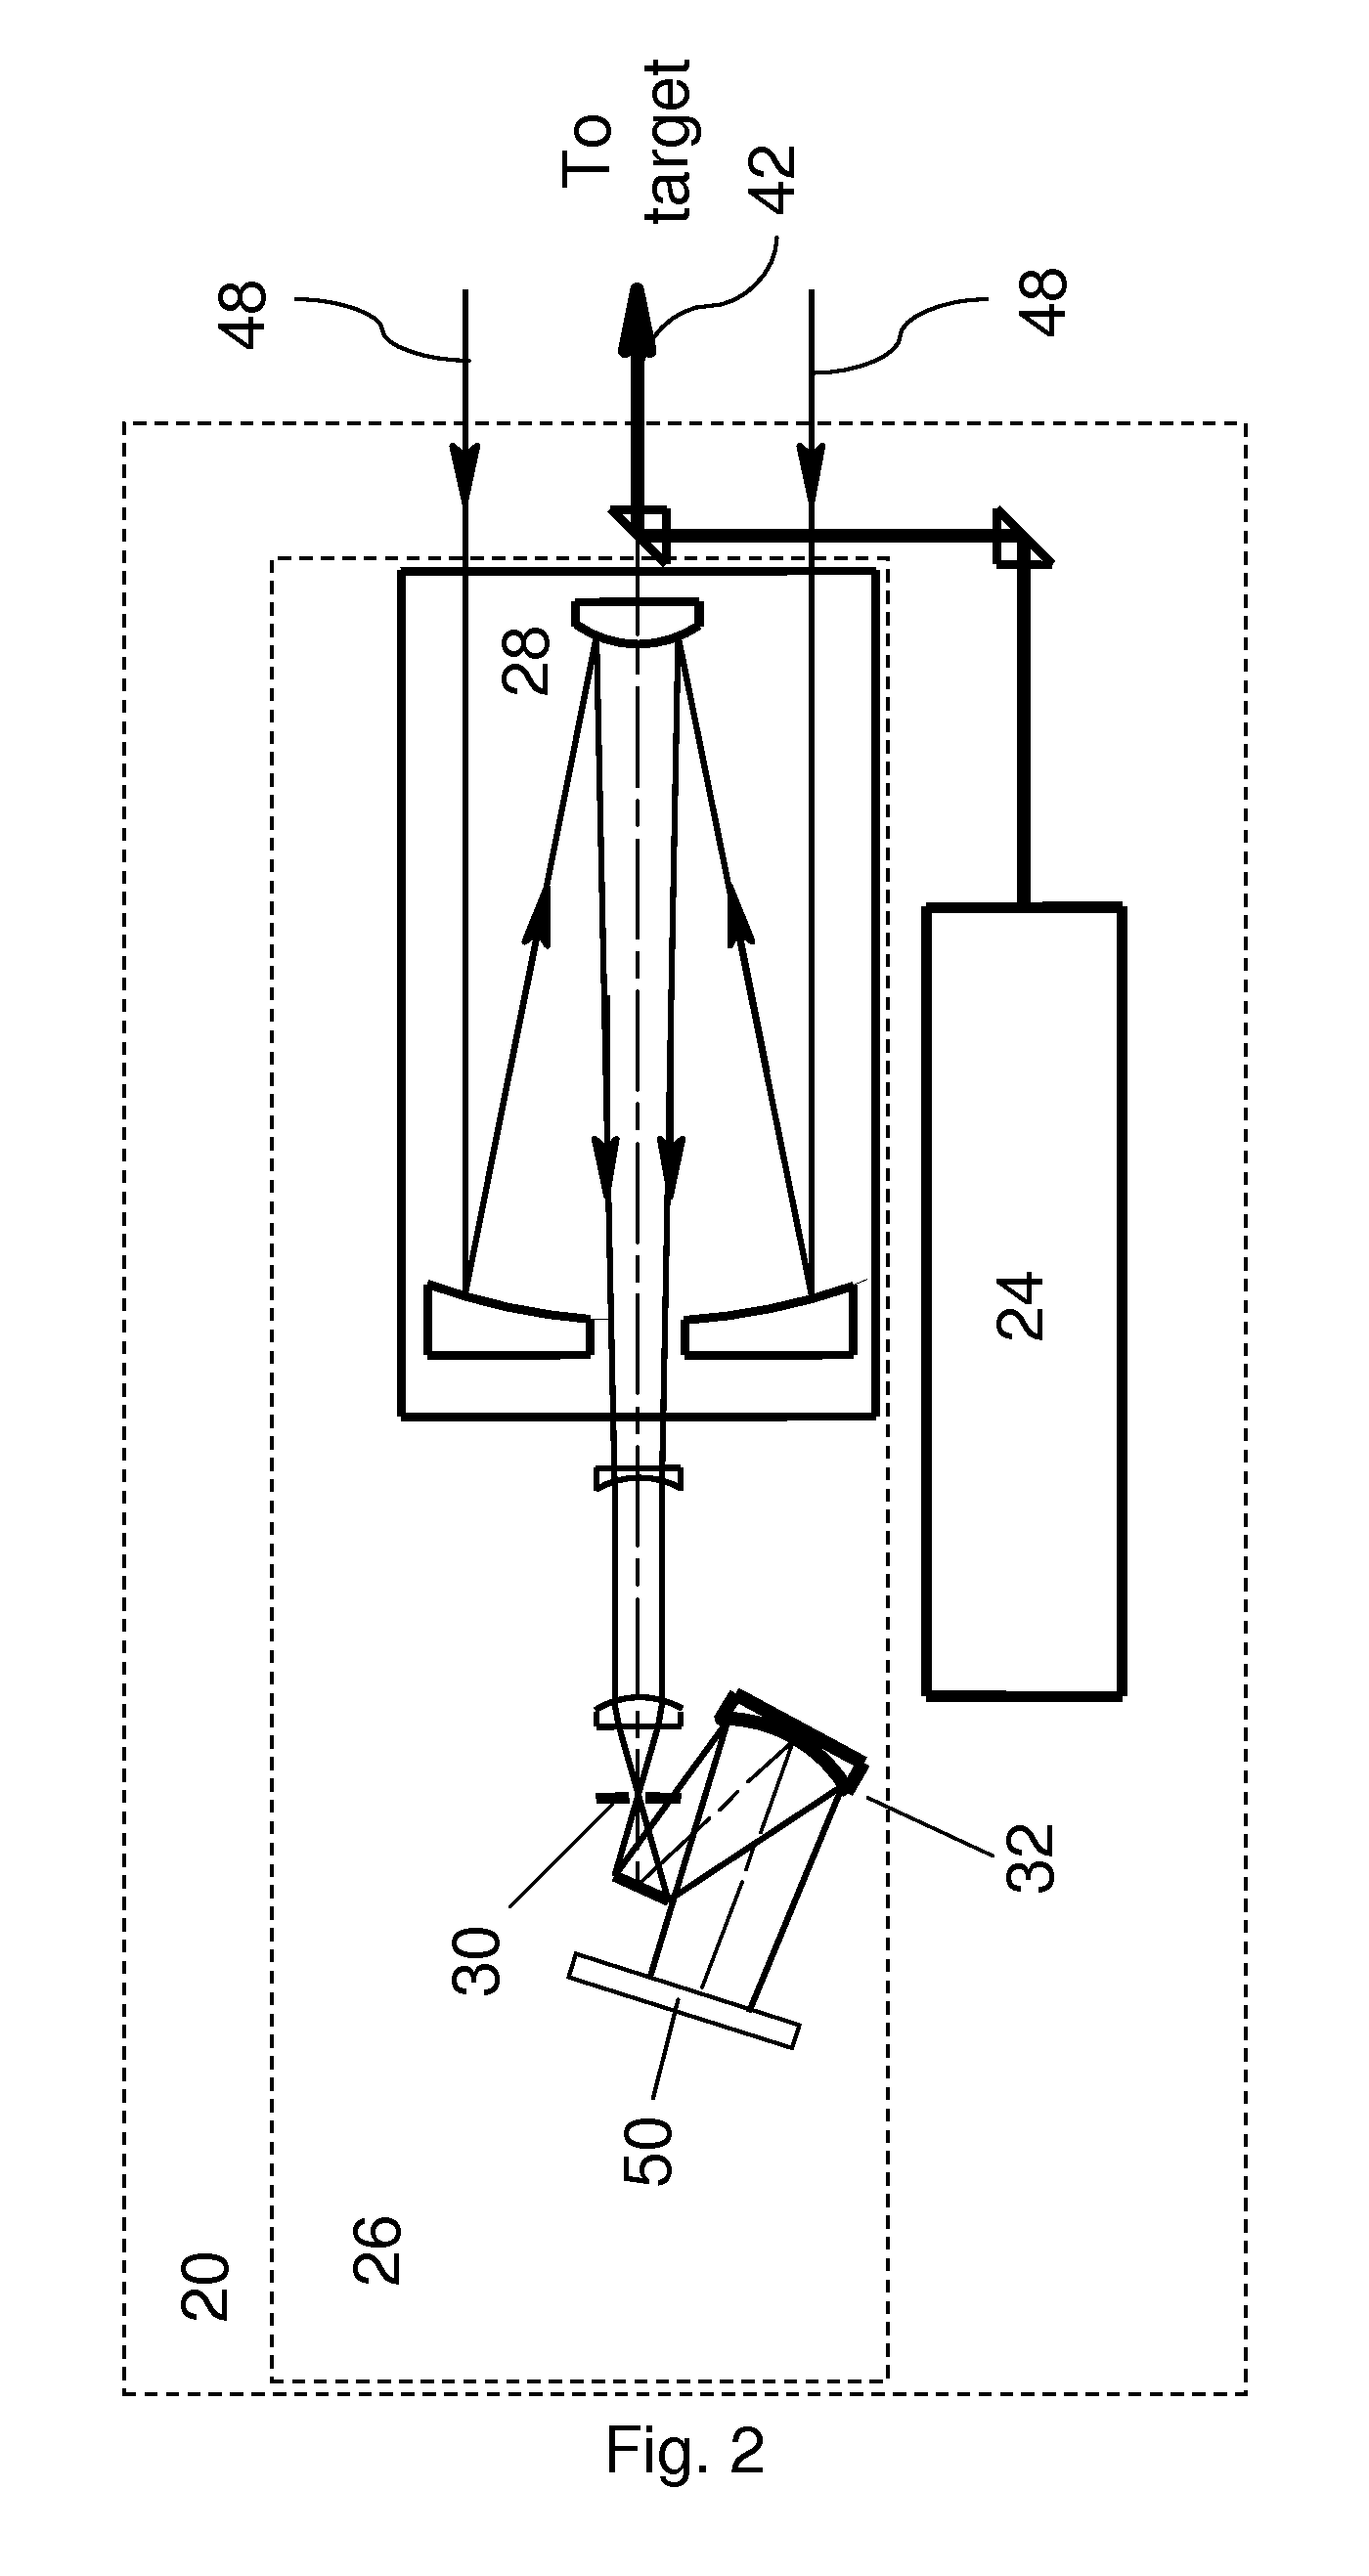 Passive background correction method for spatially resolved detection